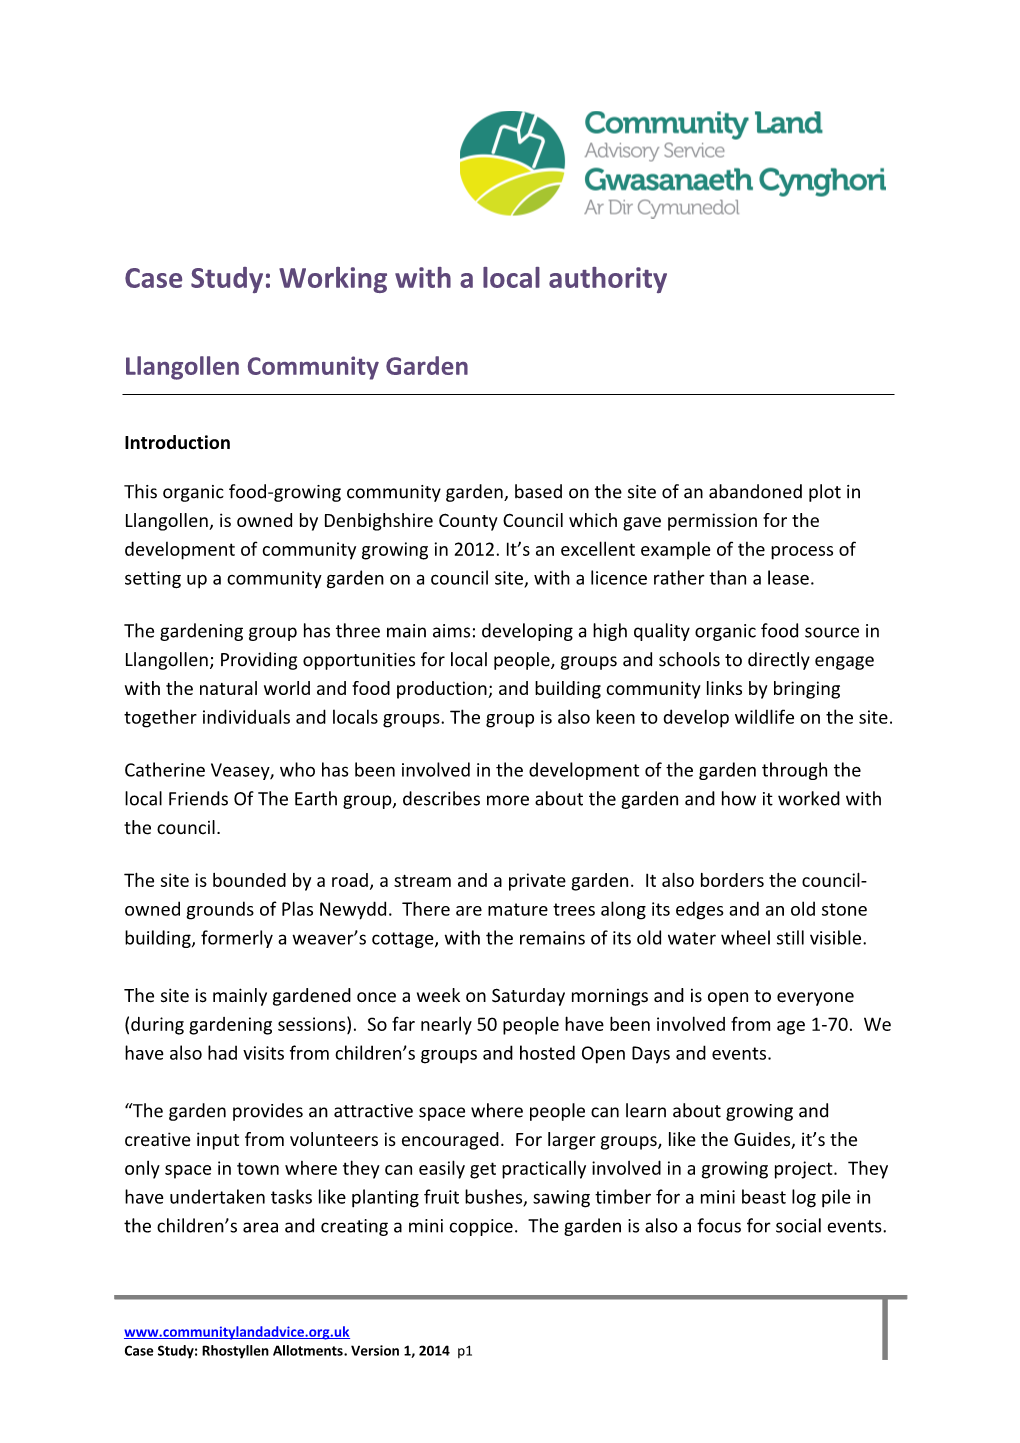 Case Study: Working with a Local Authority